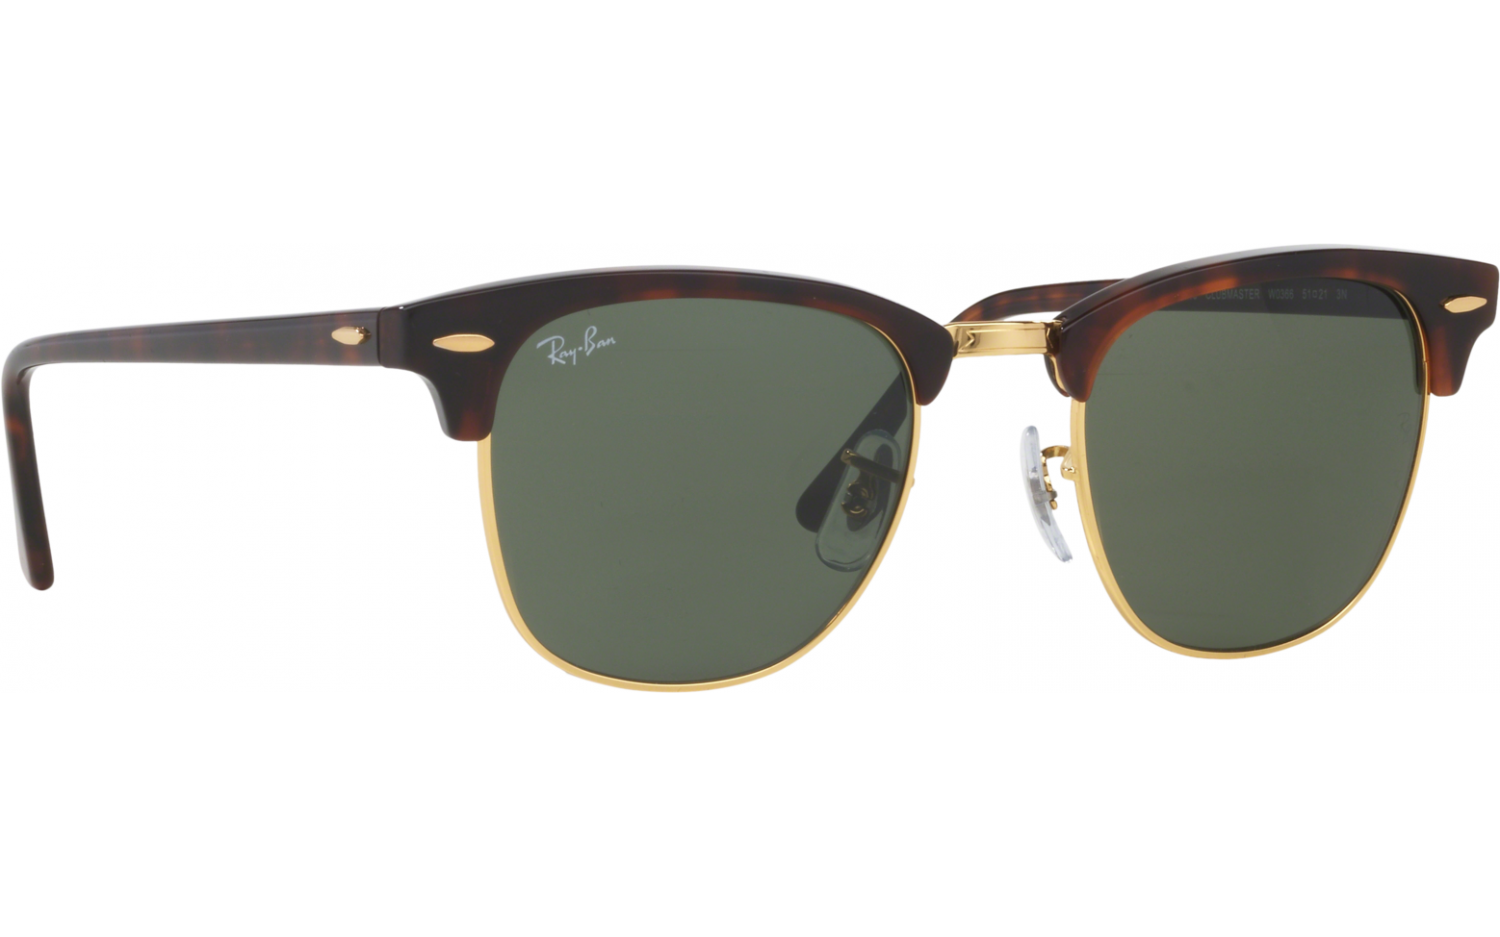 Ray Ban Clubmaster Rb3016 W0366 49 Sunglasses Shade Station